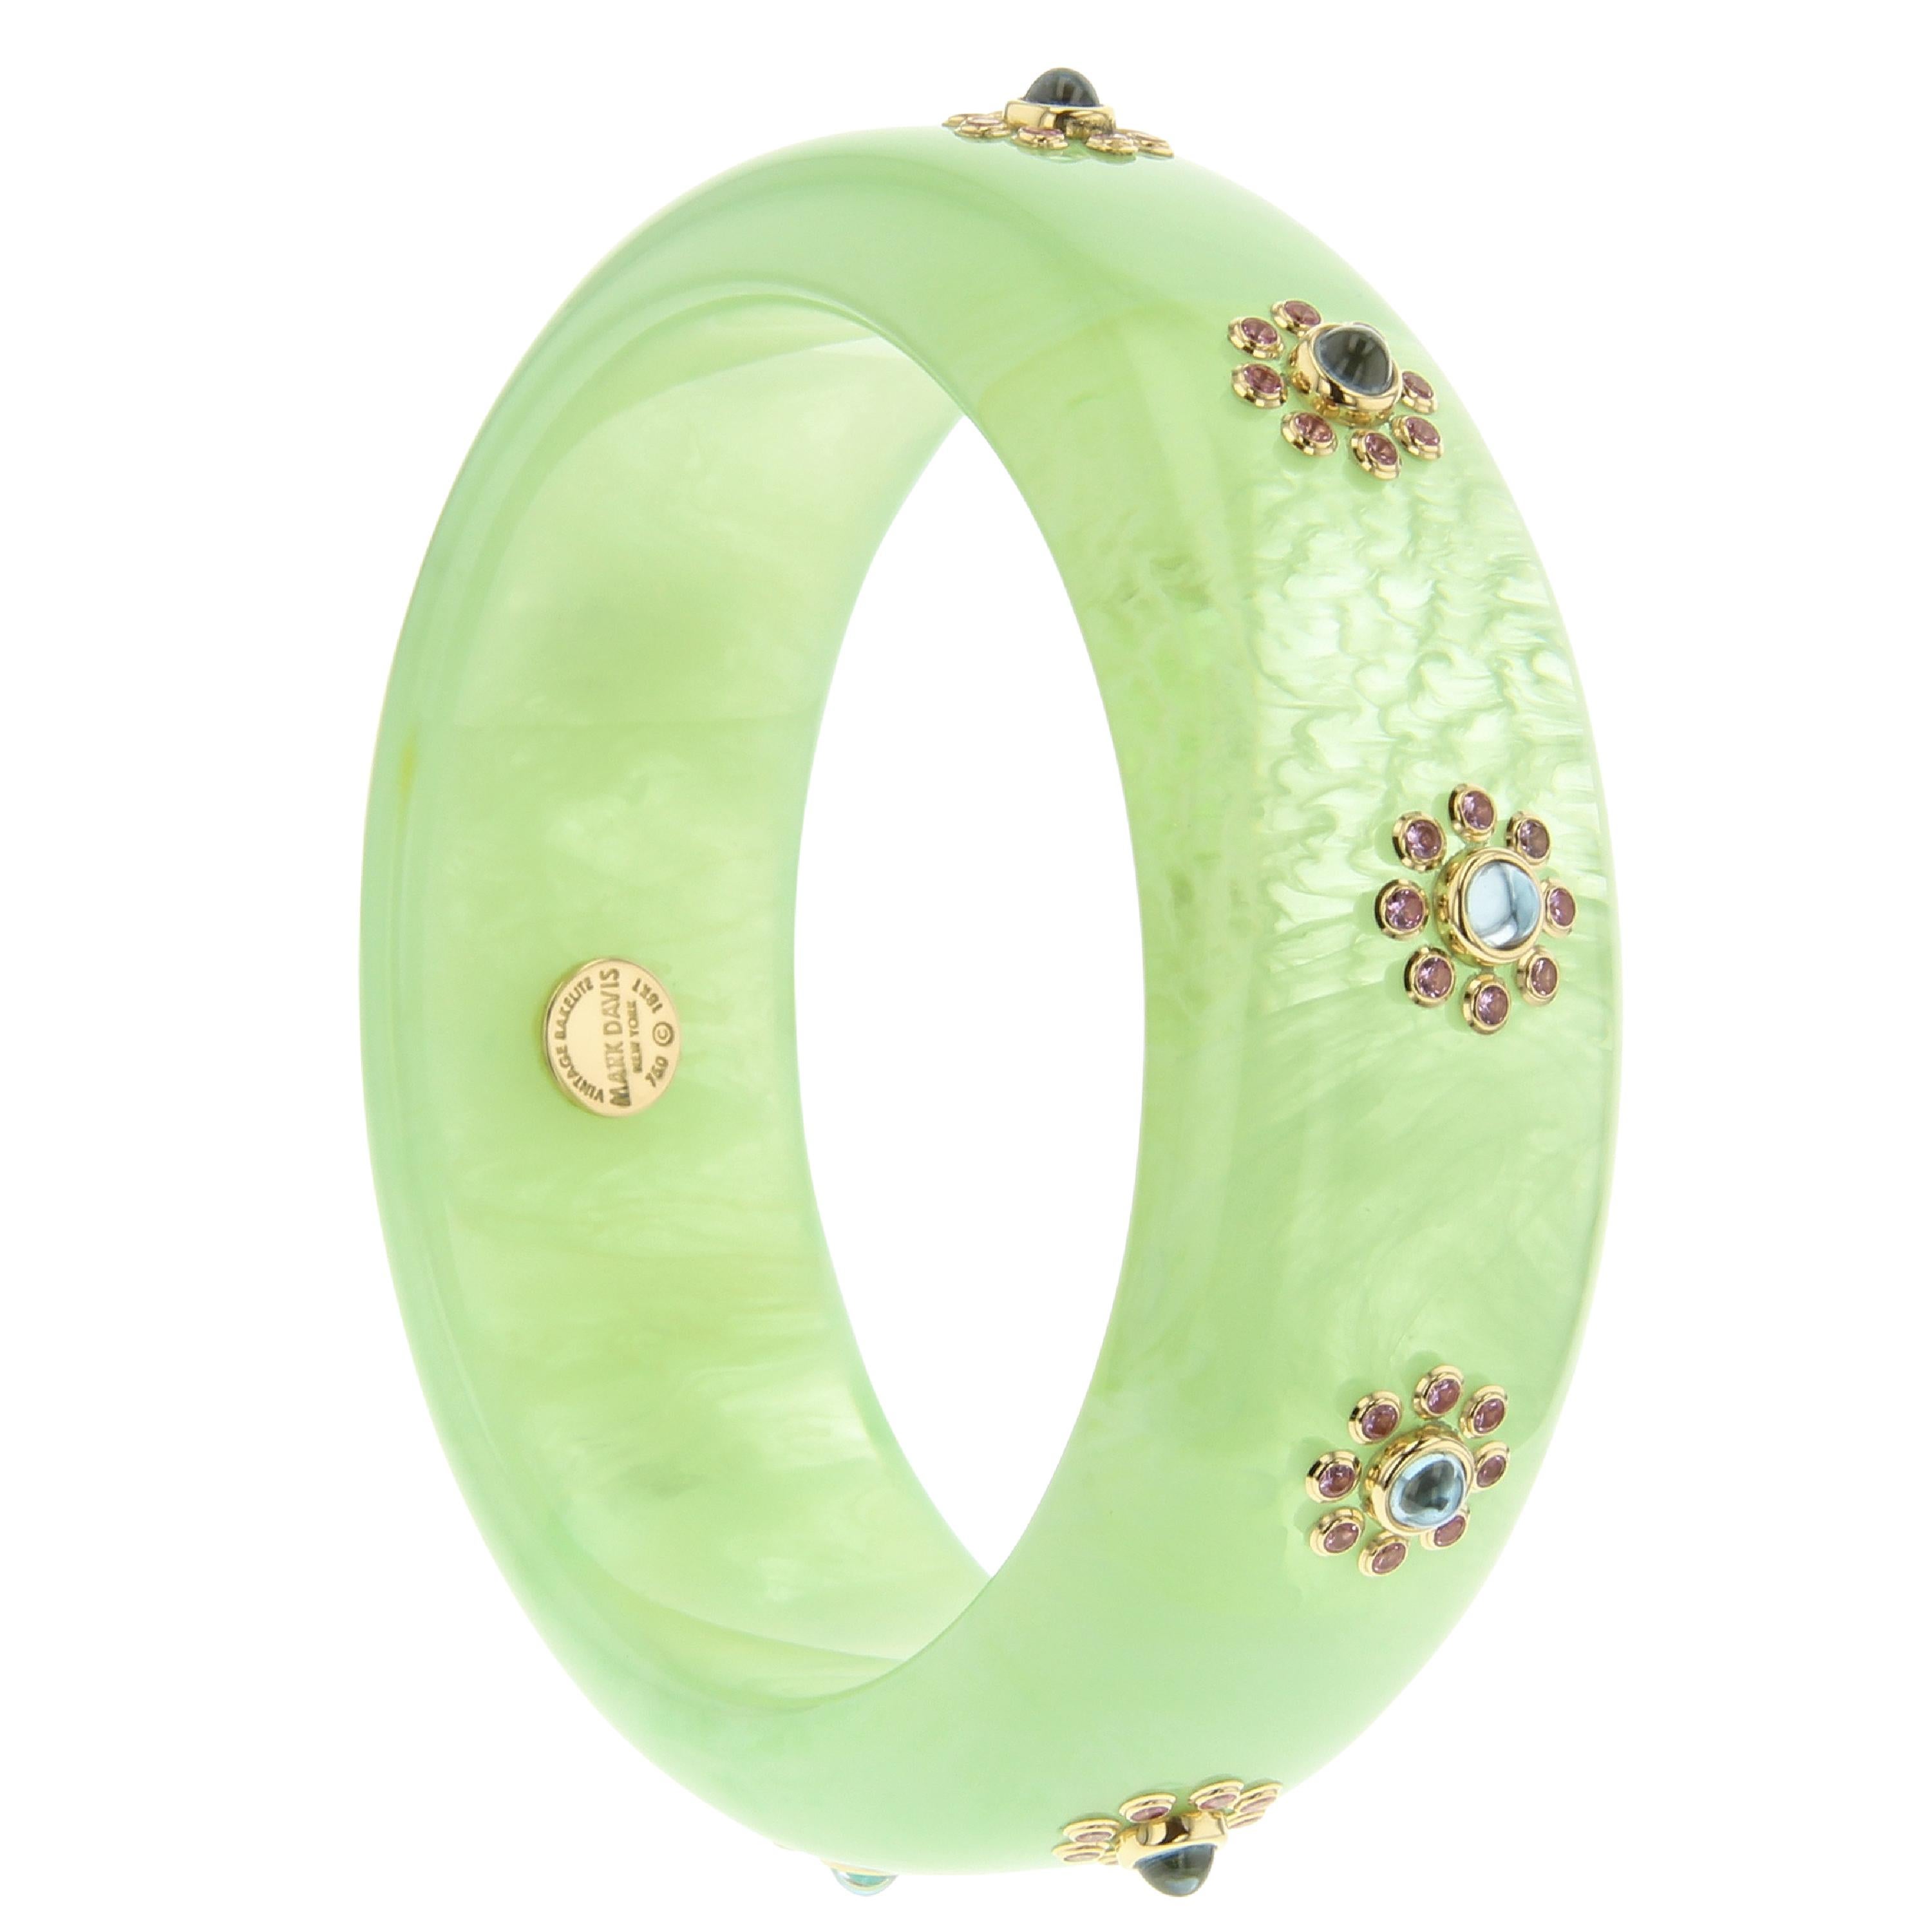 This Mark Davis bangle was created with an almost ethereal green vintage bakelite. The bakelite has marbling throughout that is reminiscent of fluffy clouds floating in the sky. Blue topaz cabochons are set in 18k yellow gold bezels and are